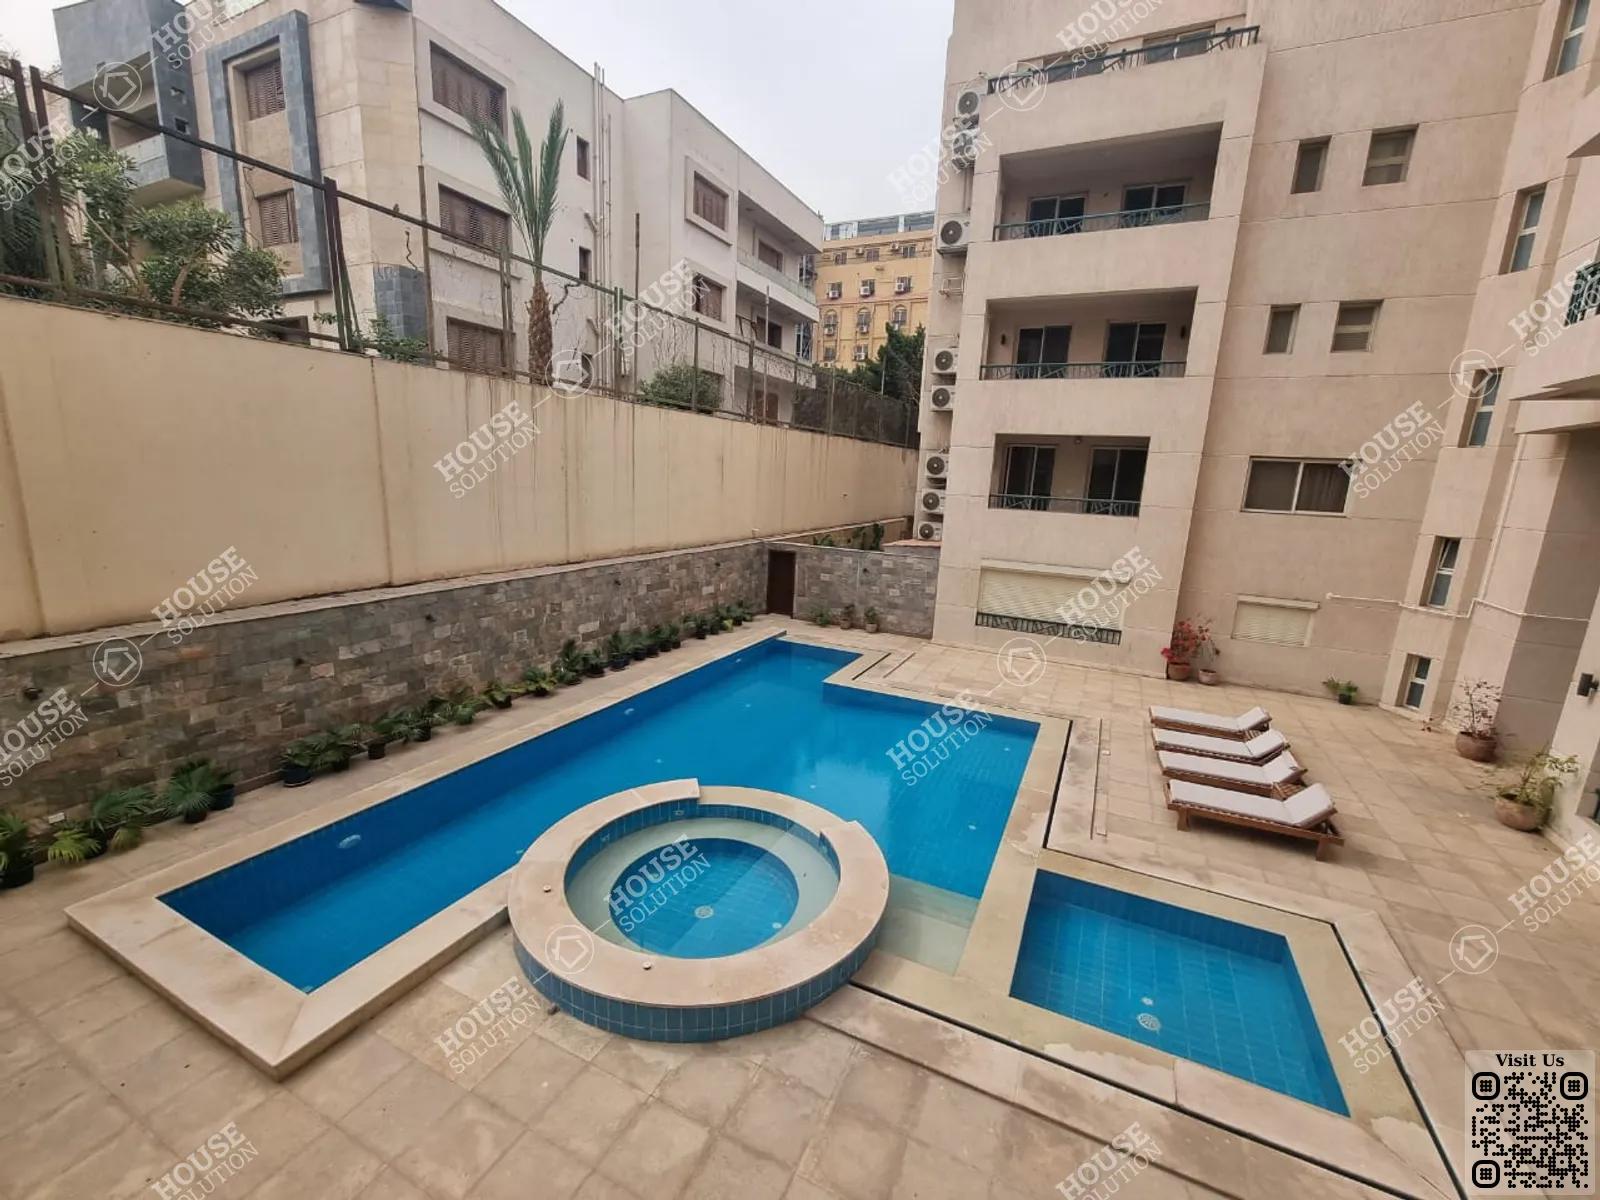 SHARED SWIMMING POOL  @ Apartments For Rent In Maadi Maadi Sarayat Area: 200 m² consists of 3 Bedrooms 3 Bathrooms Modern furnished 4 stars #5170-1